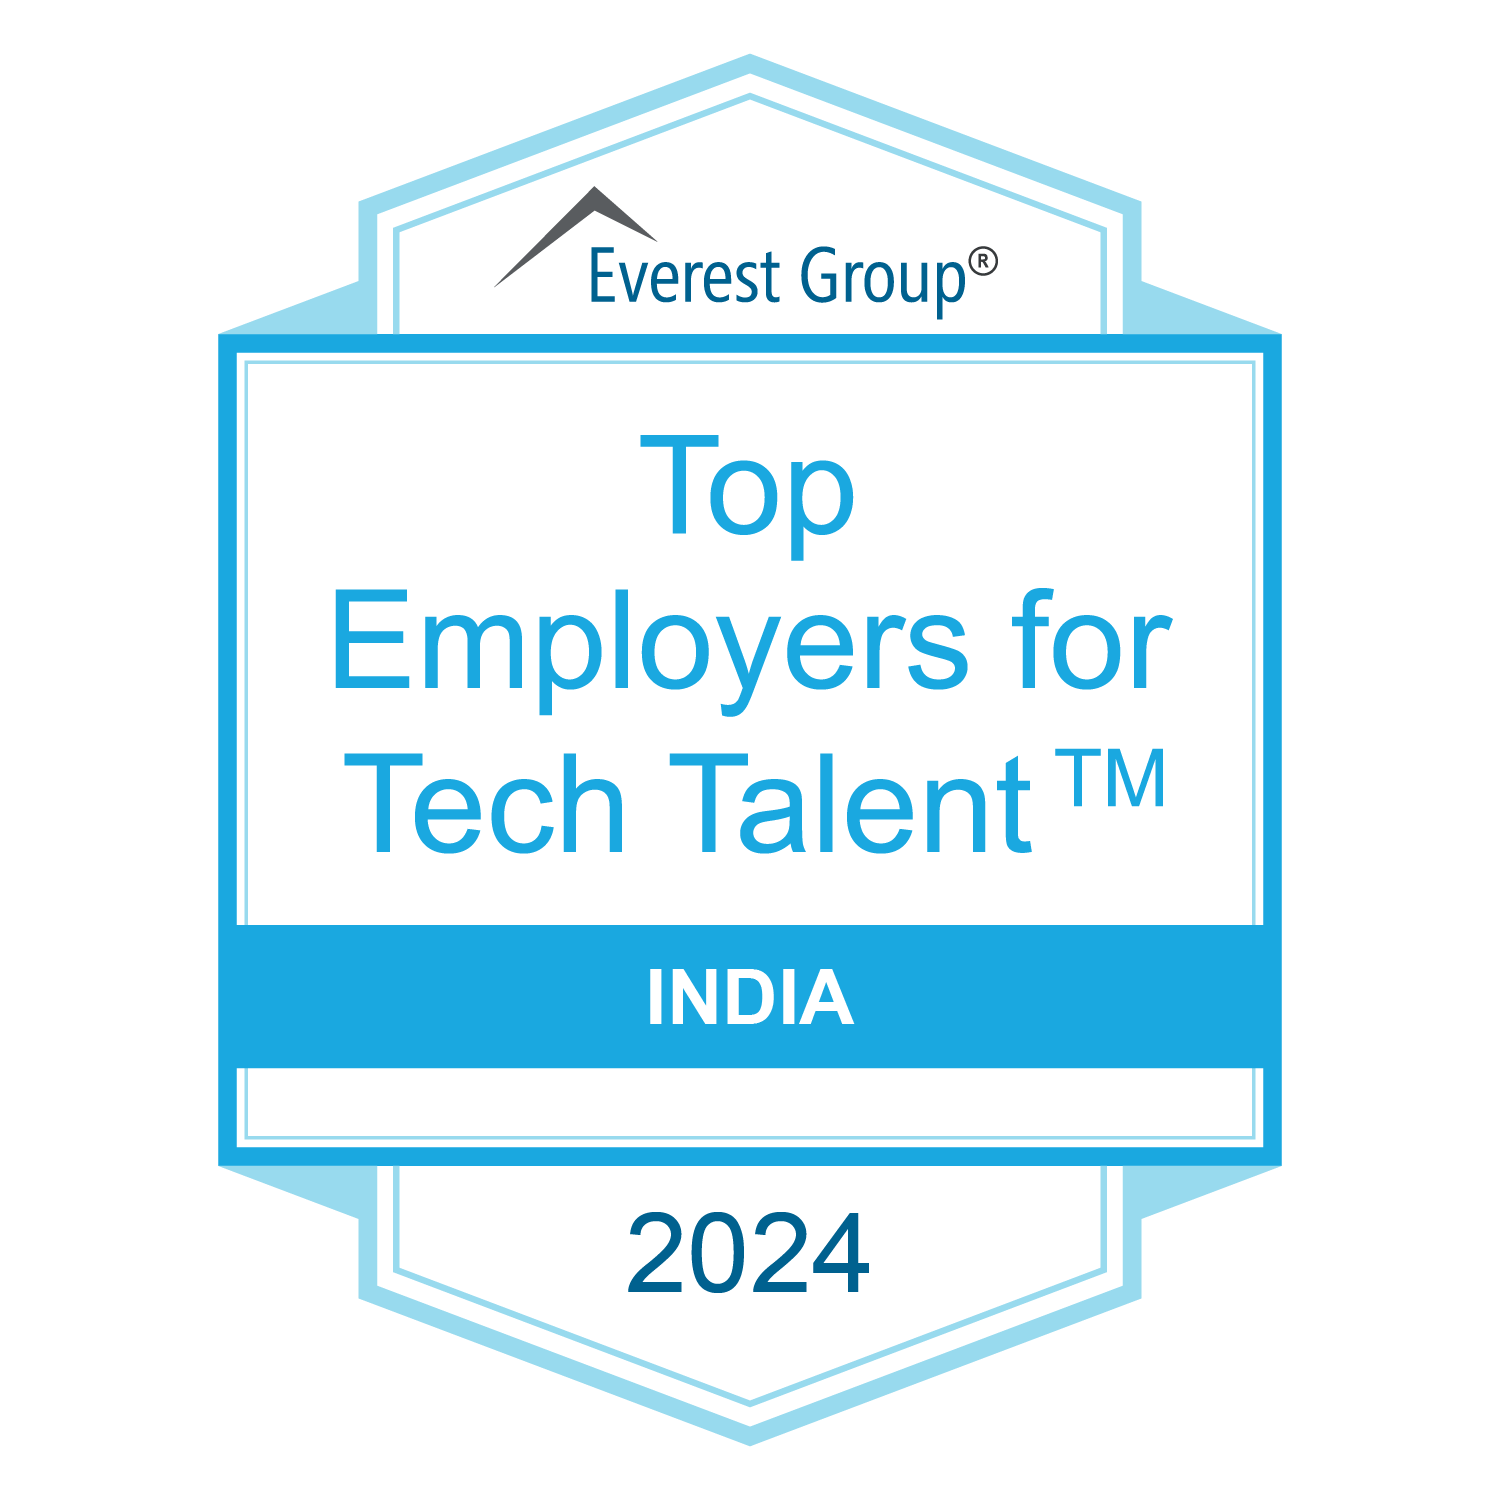 Everest Group Top Employers for Tech Talent India 2024